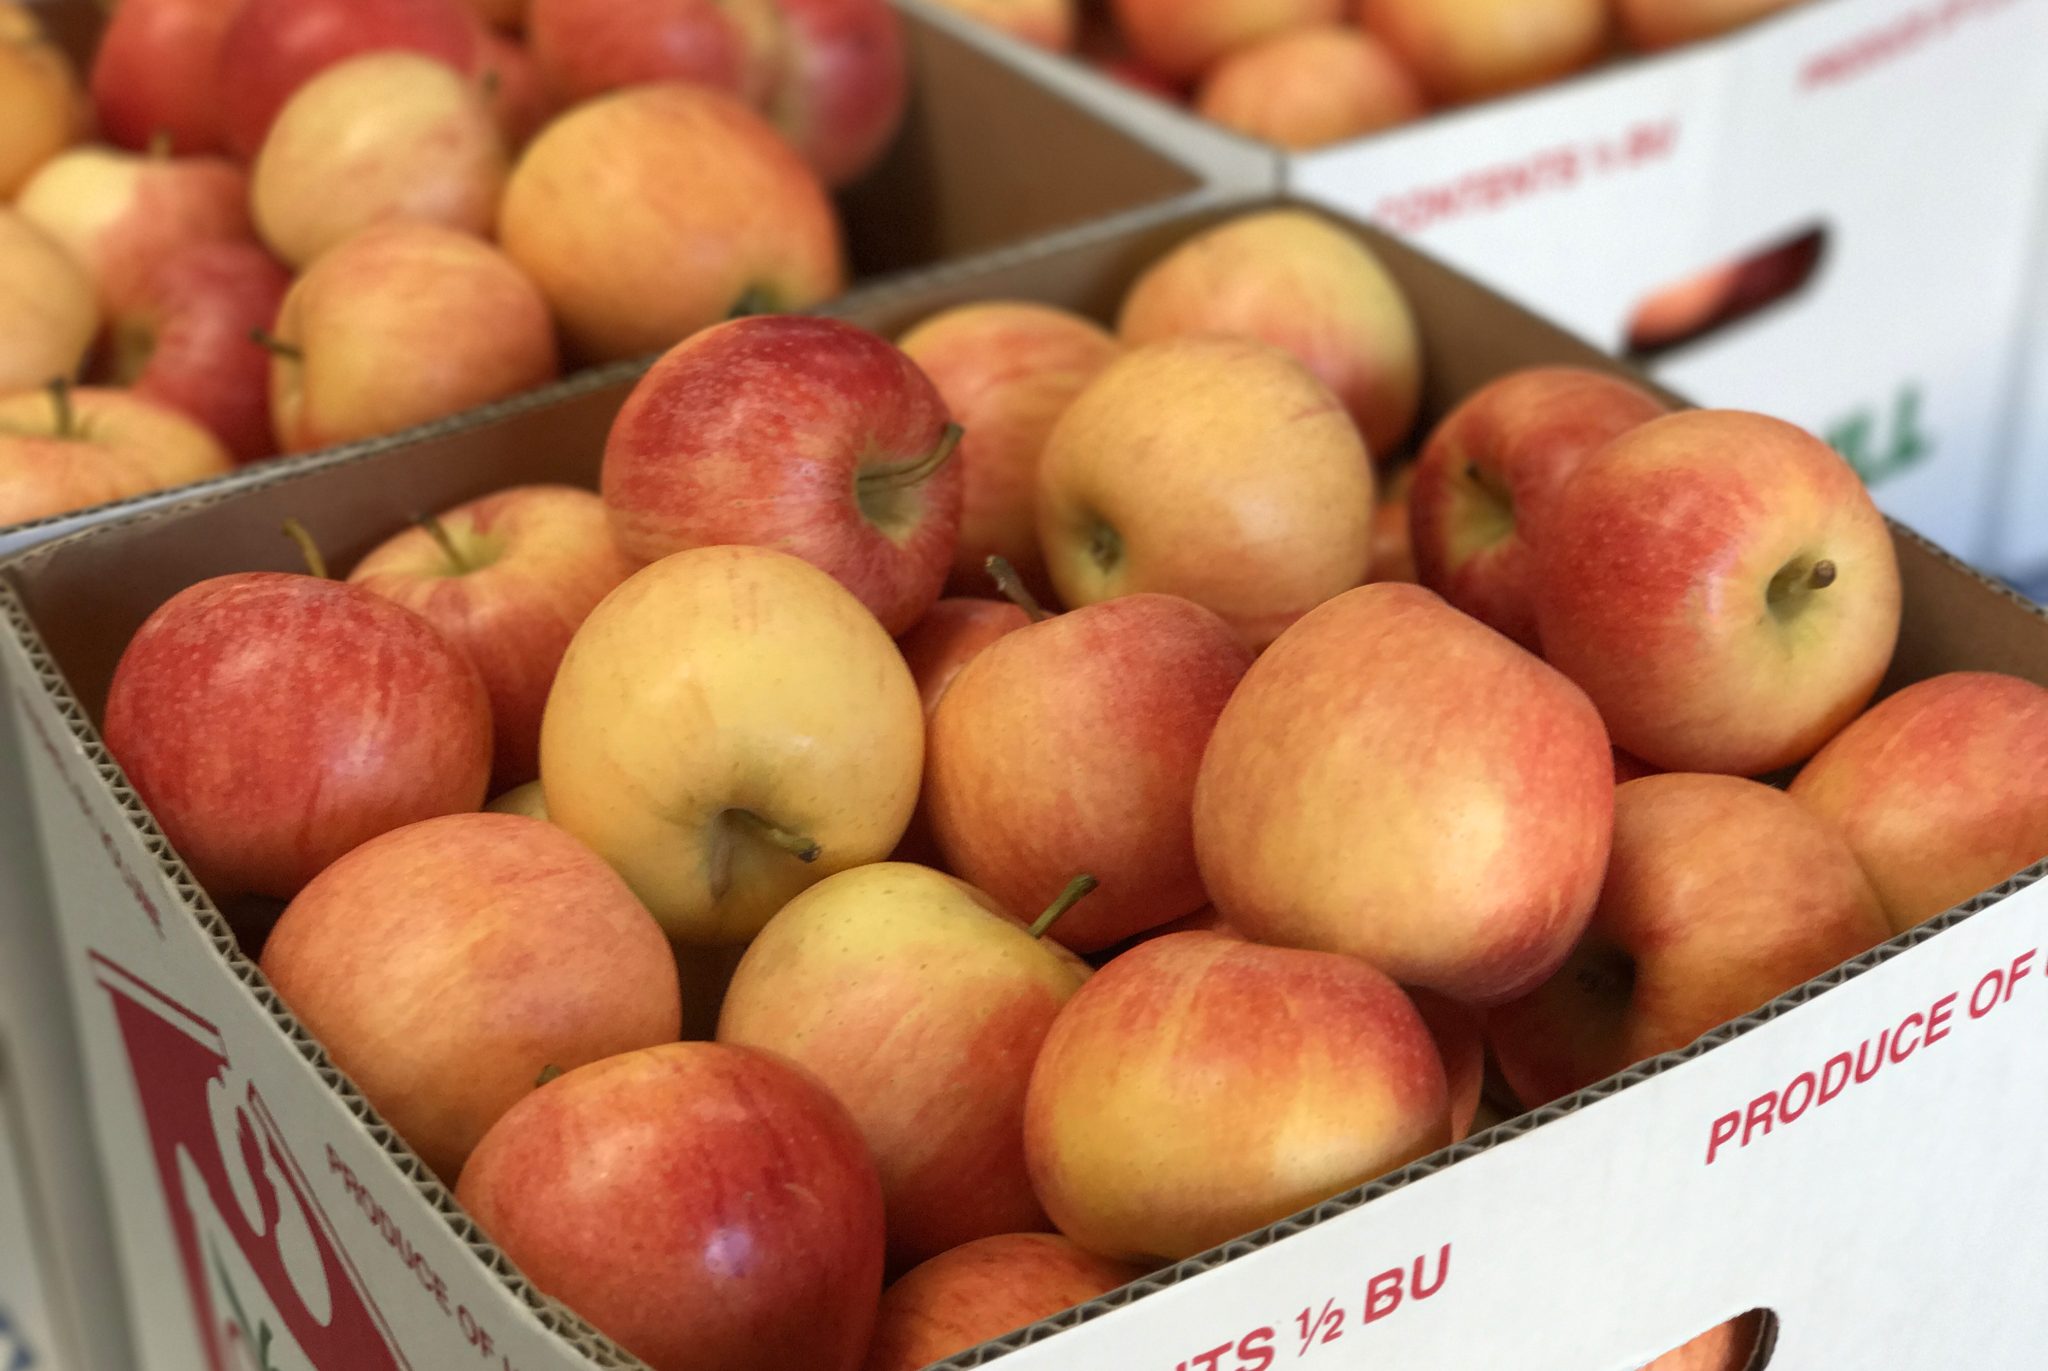 Boxes of fresh picked apples